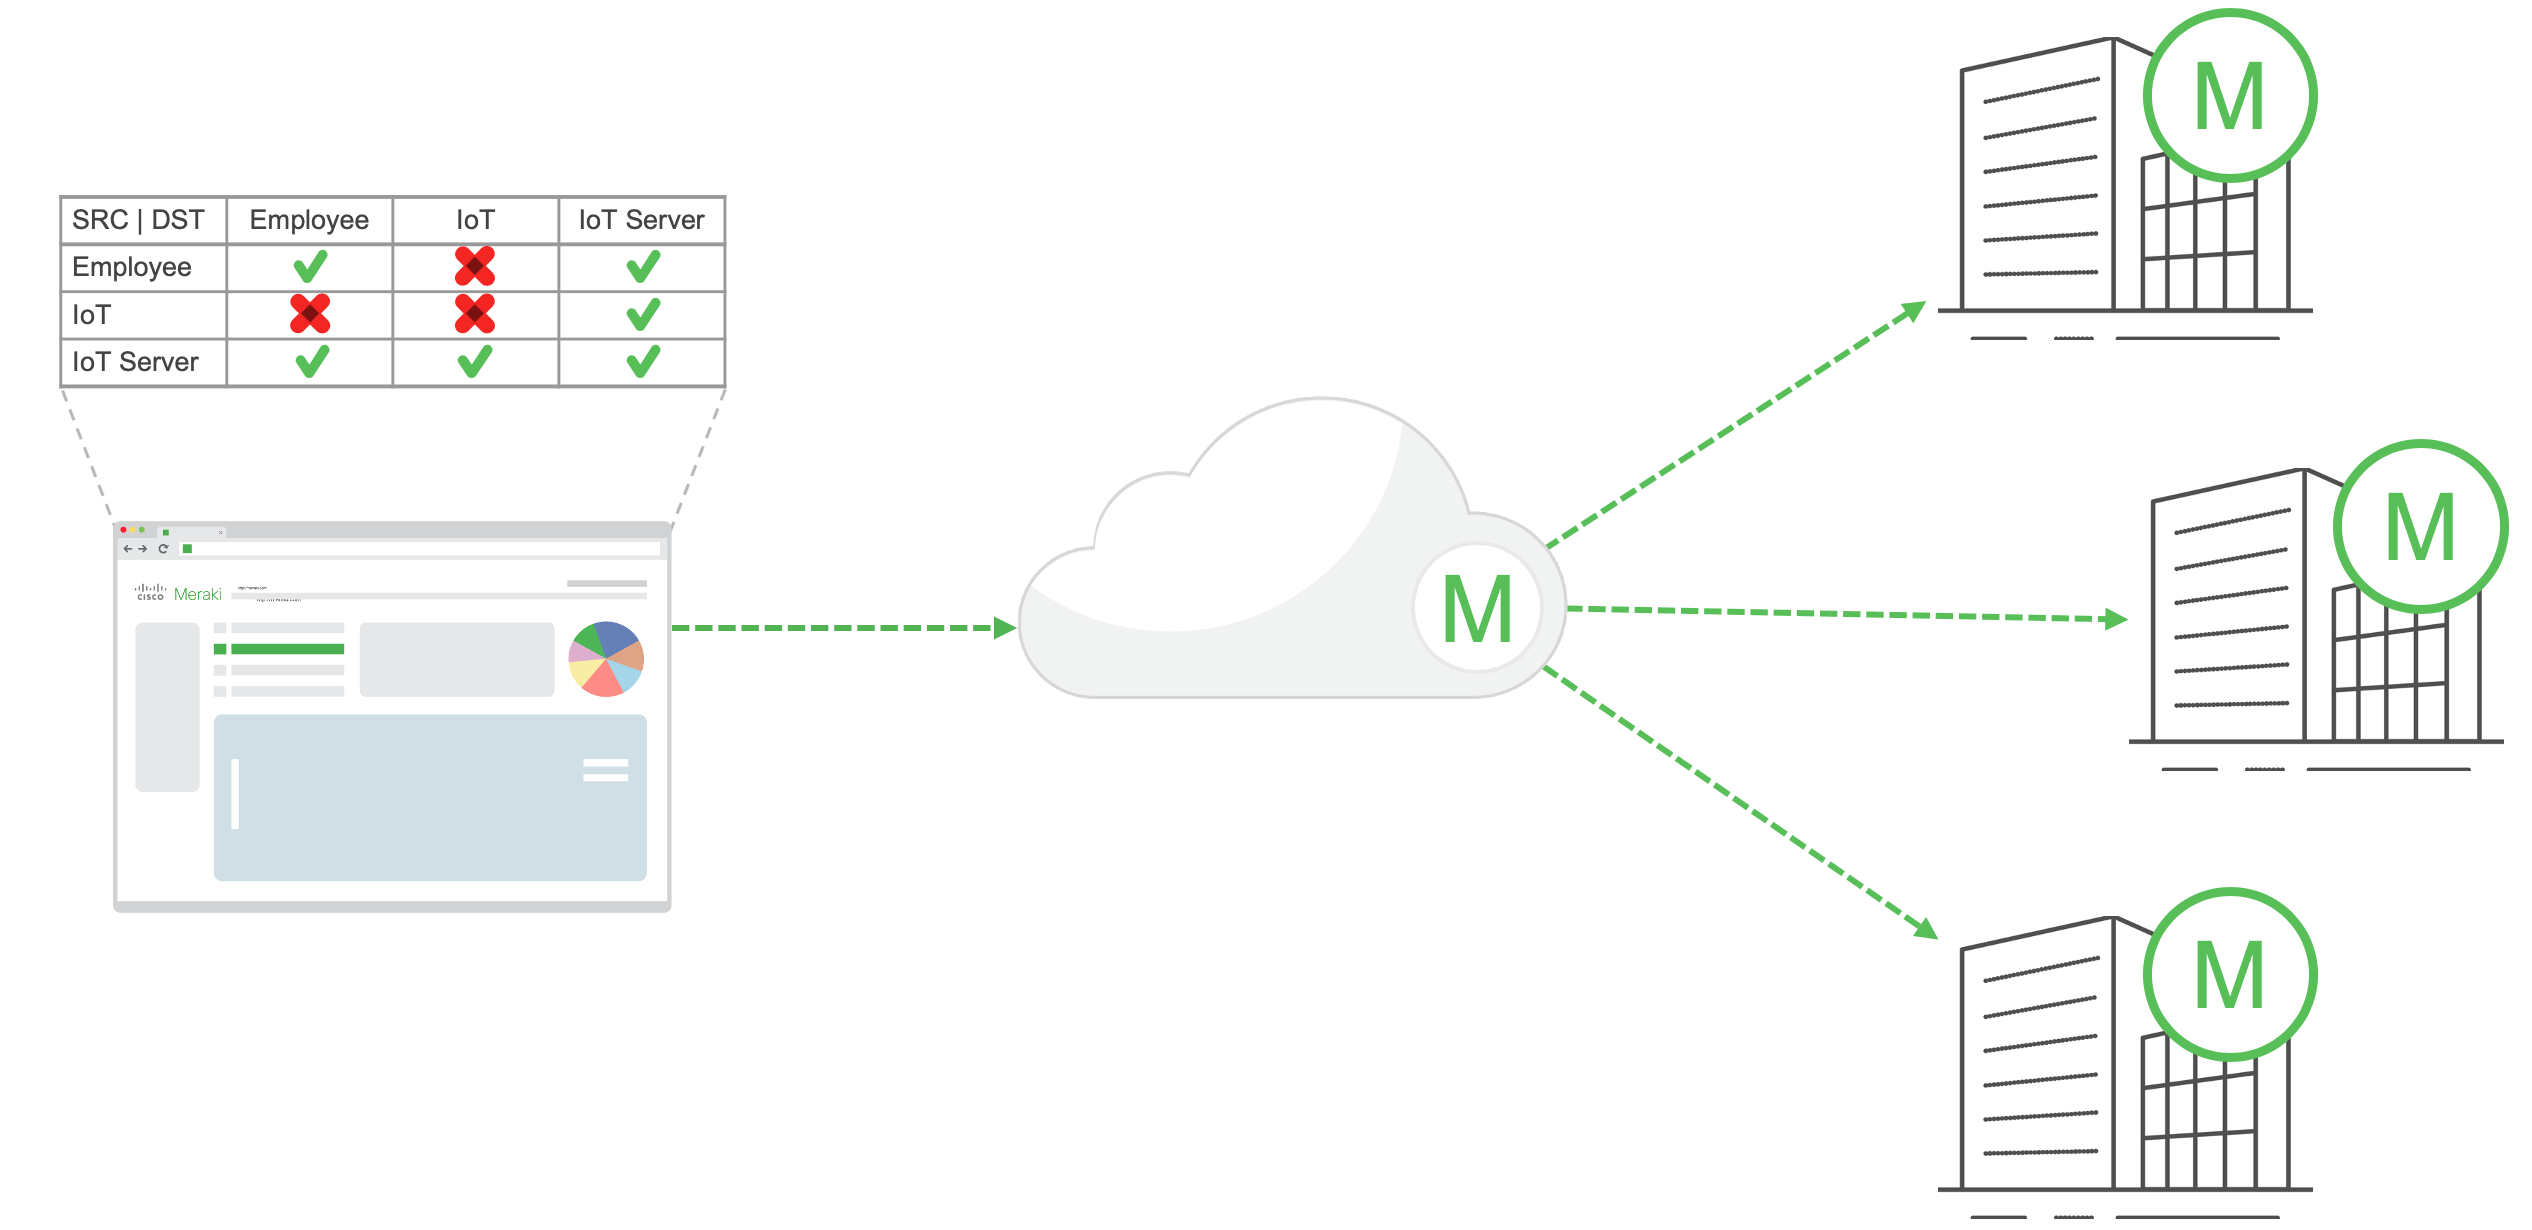 Policy deployment graph showing the configuration is saved and stored in the Meraki cloud and Meraki deployed branches